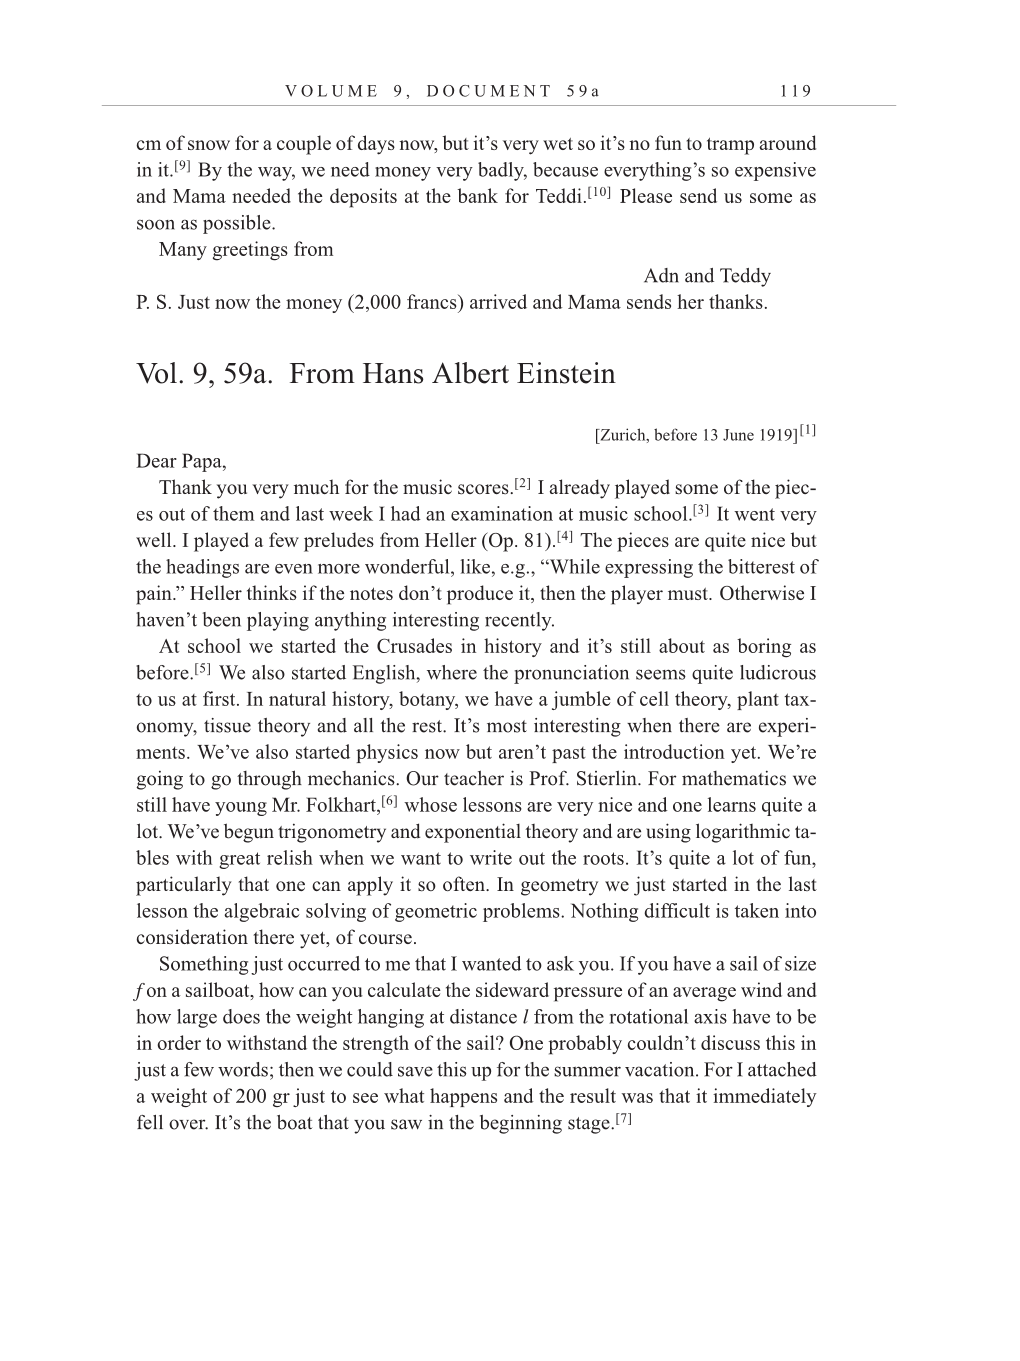 Volume 10: The Berlin Years: Correspondence, May-December 1920, and Supplementary Correspondence, 1909-1920 (English translation supplement) page 119